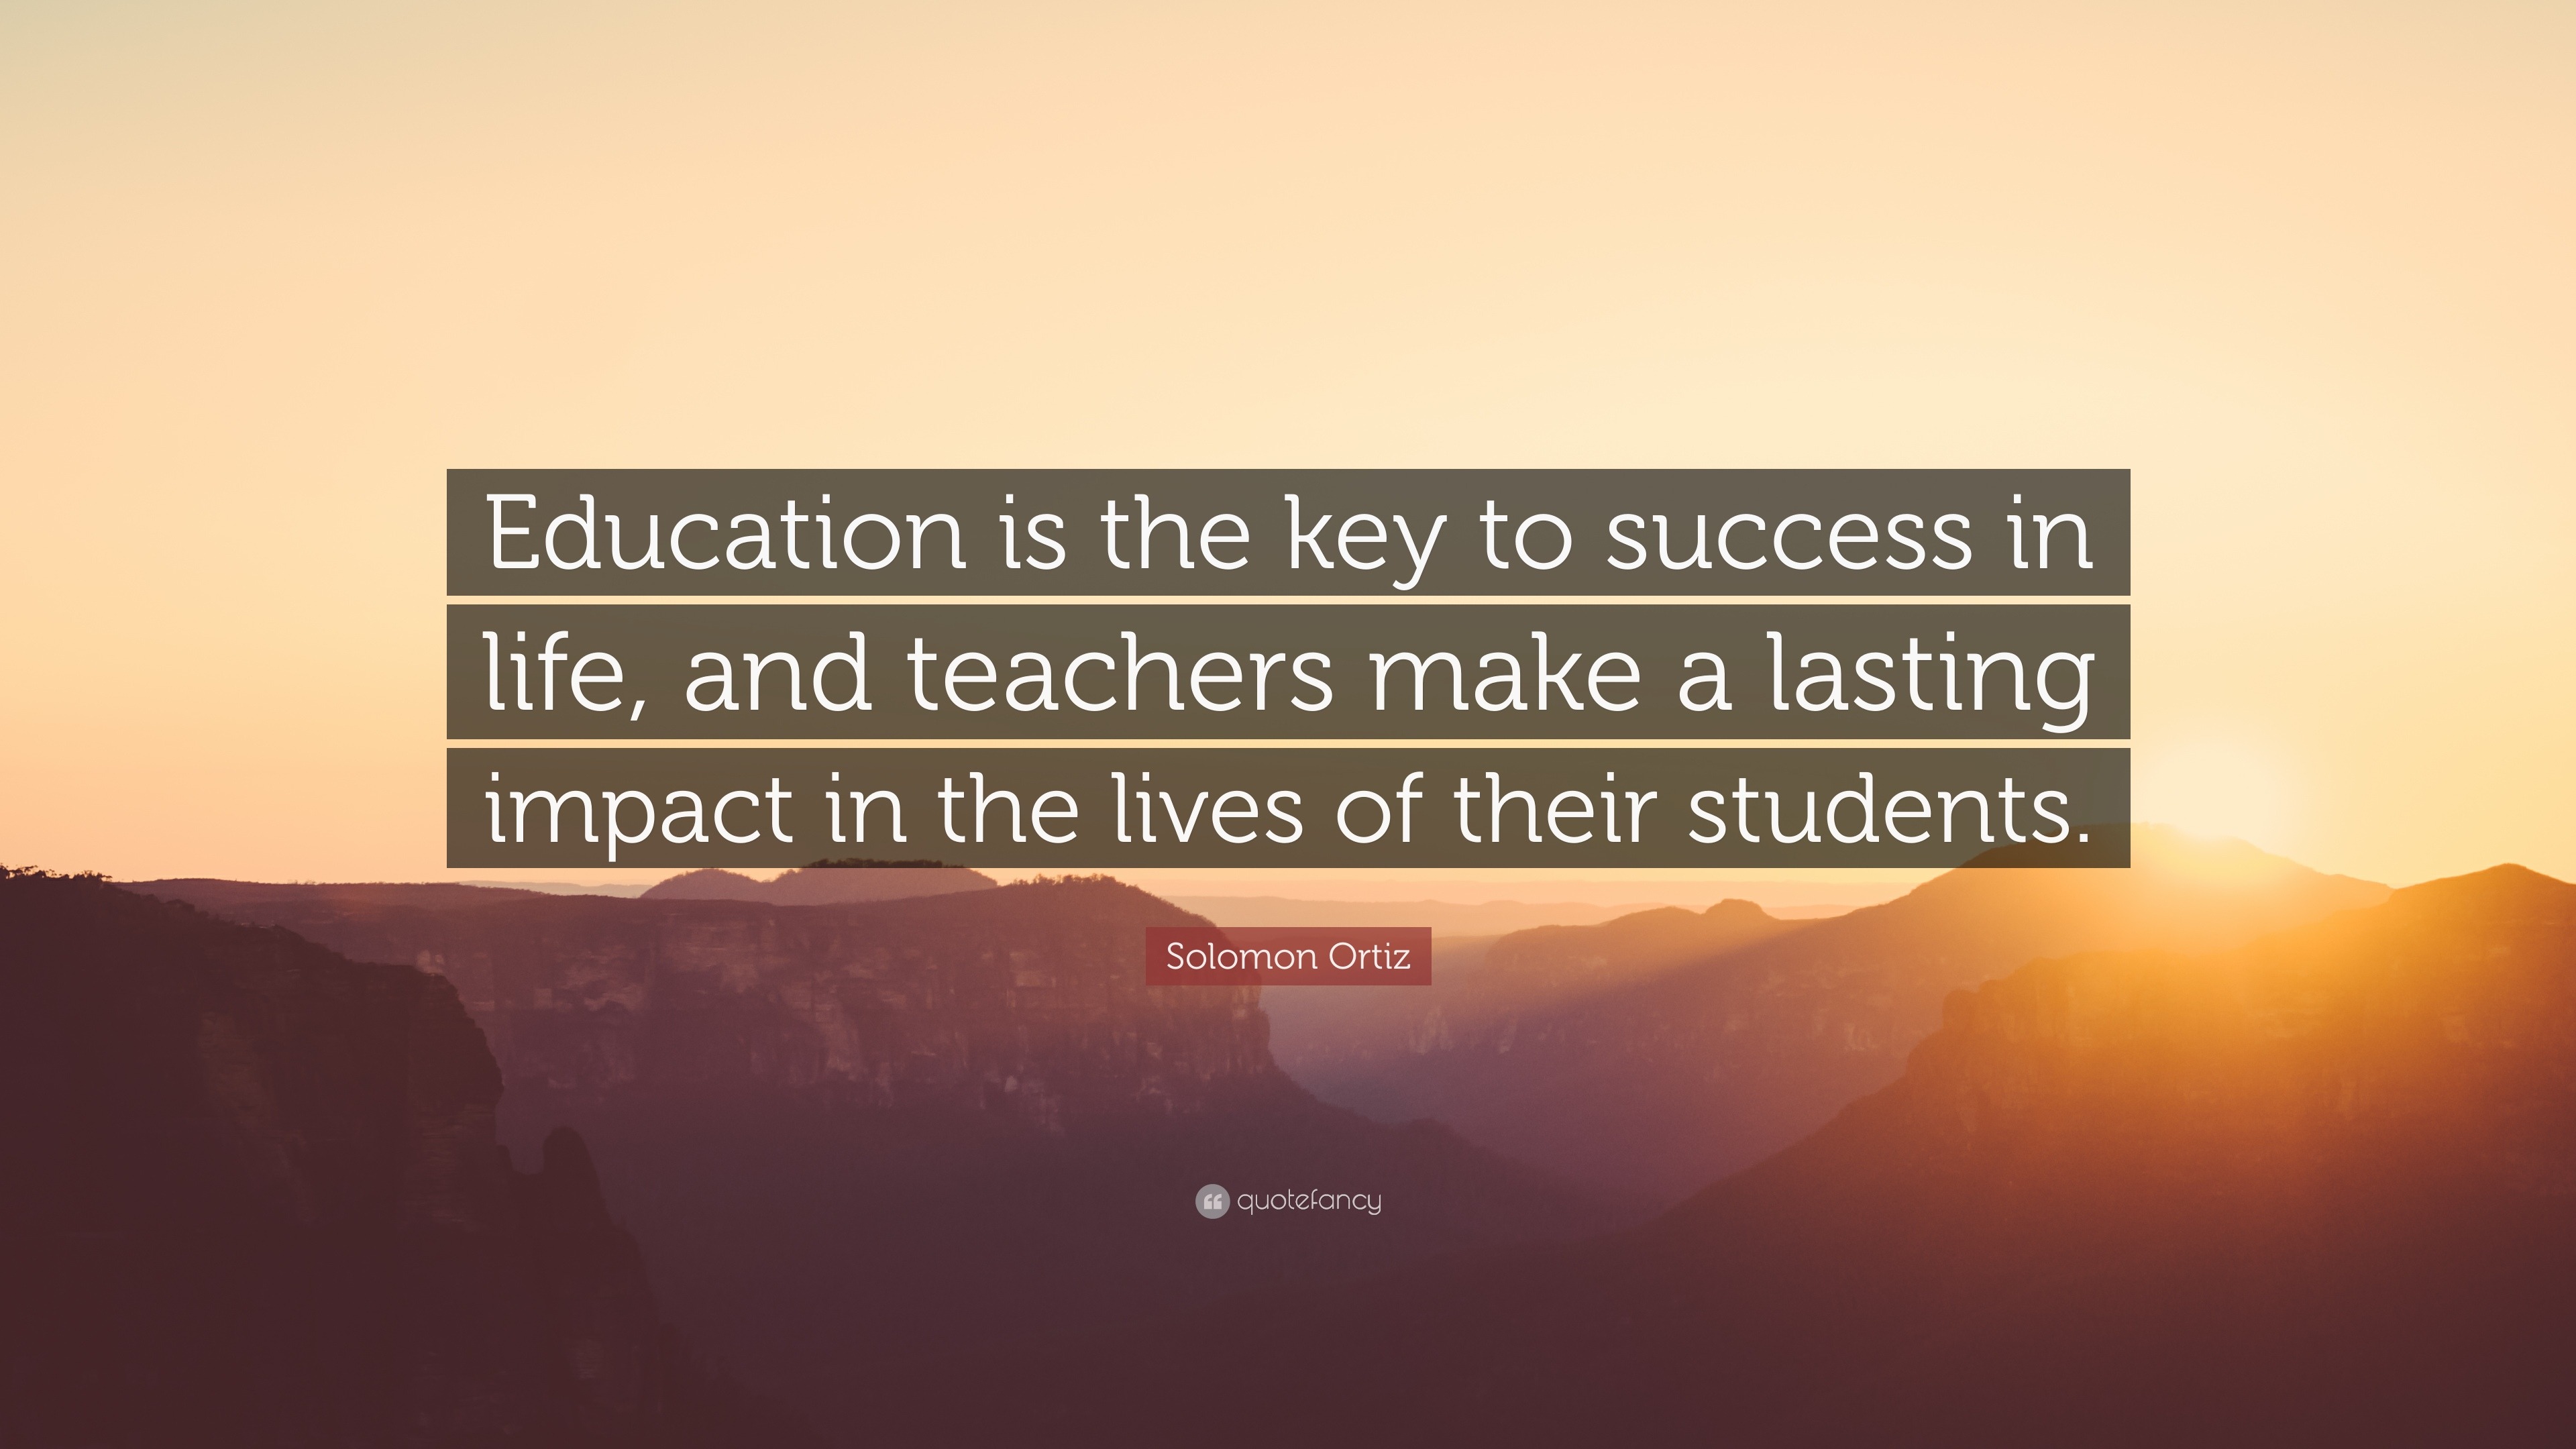 a good education is the key to a successful life